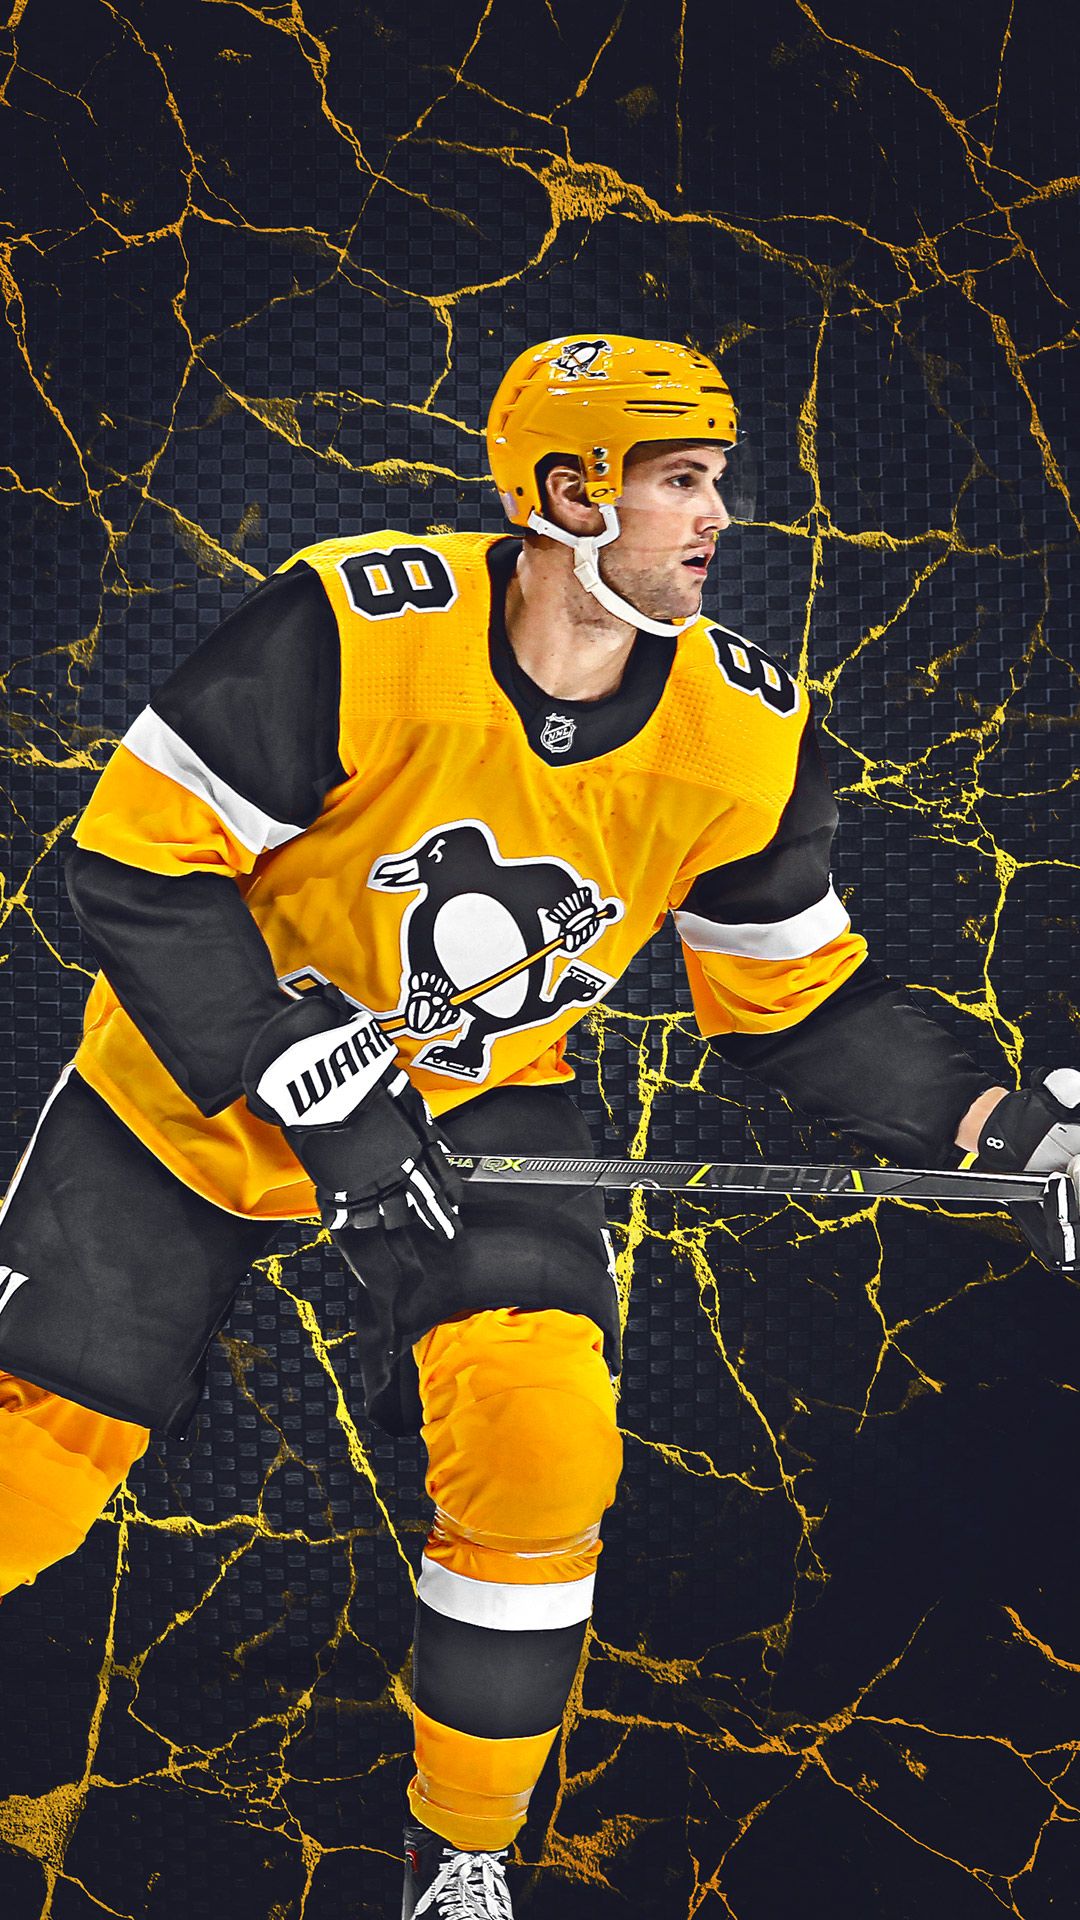 Pittsburgh Penguins on X: Looking for an all-star quality wallpaper?📱  We're here to help. See more:  #HiTechHockey